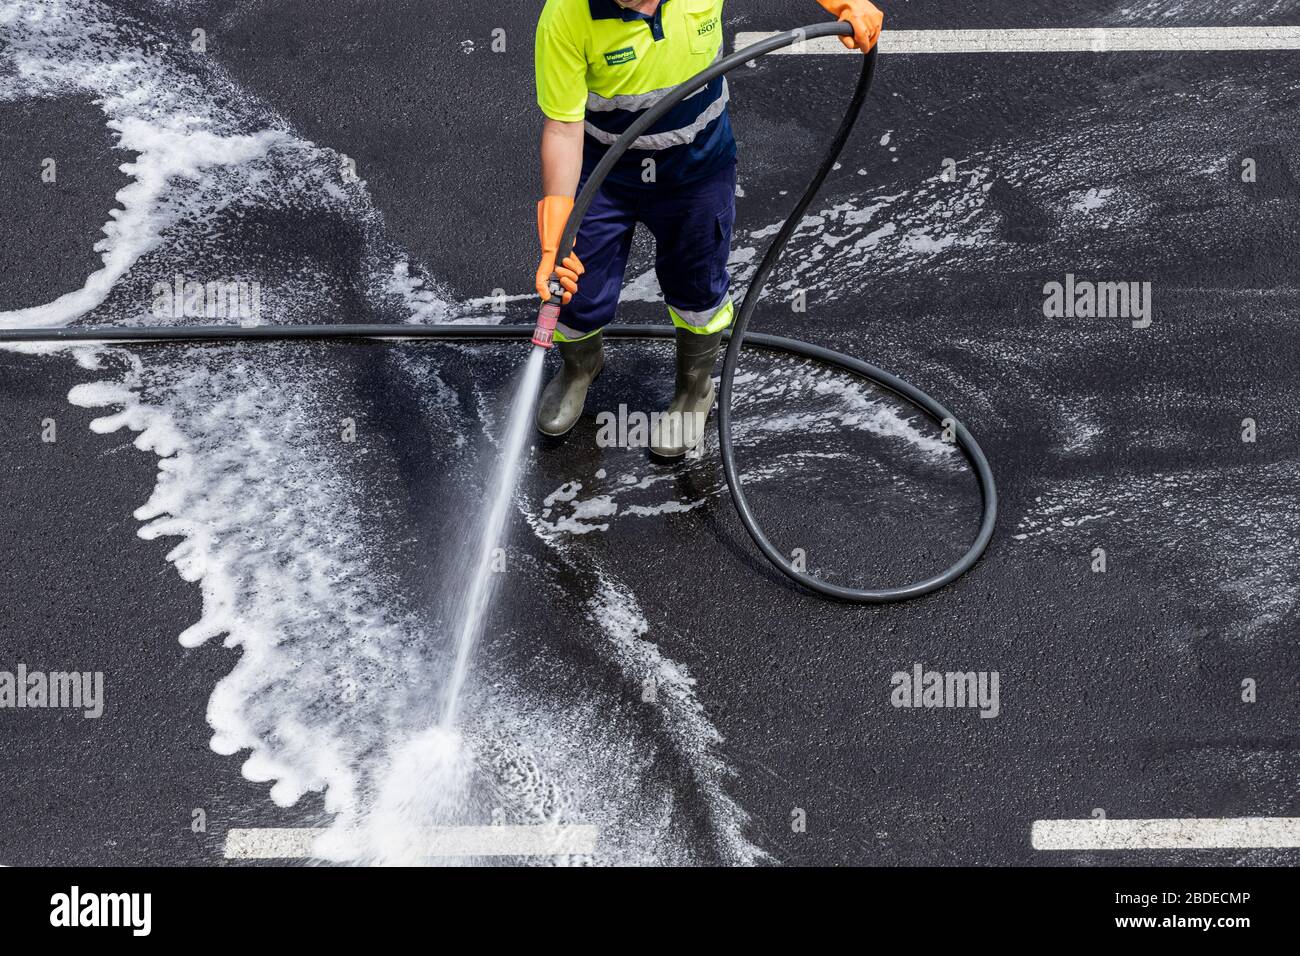 Council worker hosing down the streets with a disinfectant wash during the coronavirus lockdown, Playa San Juan, Tenerife, Canary Islands, Spain Stock Photo